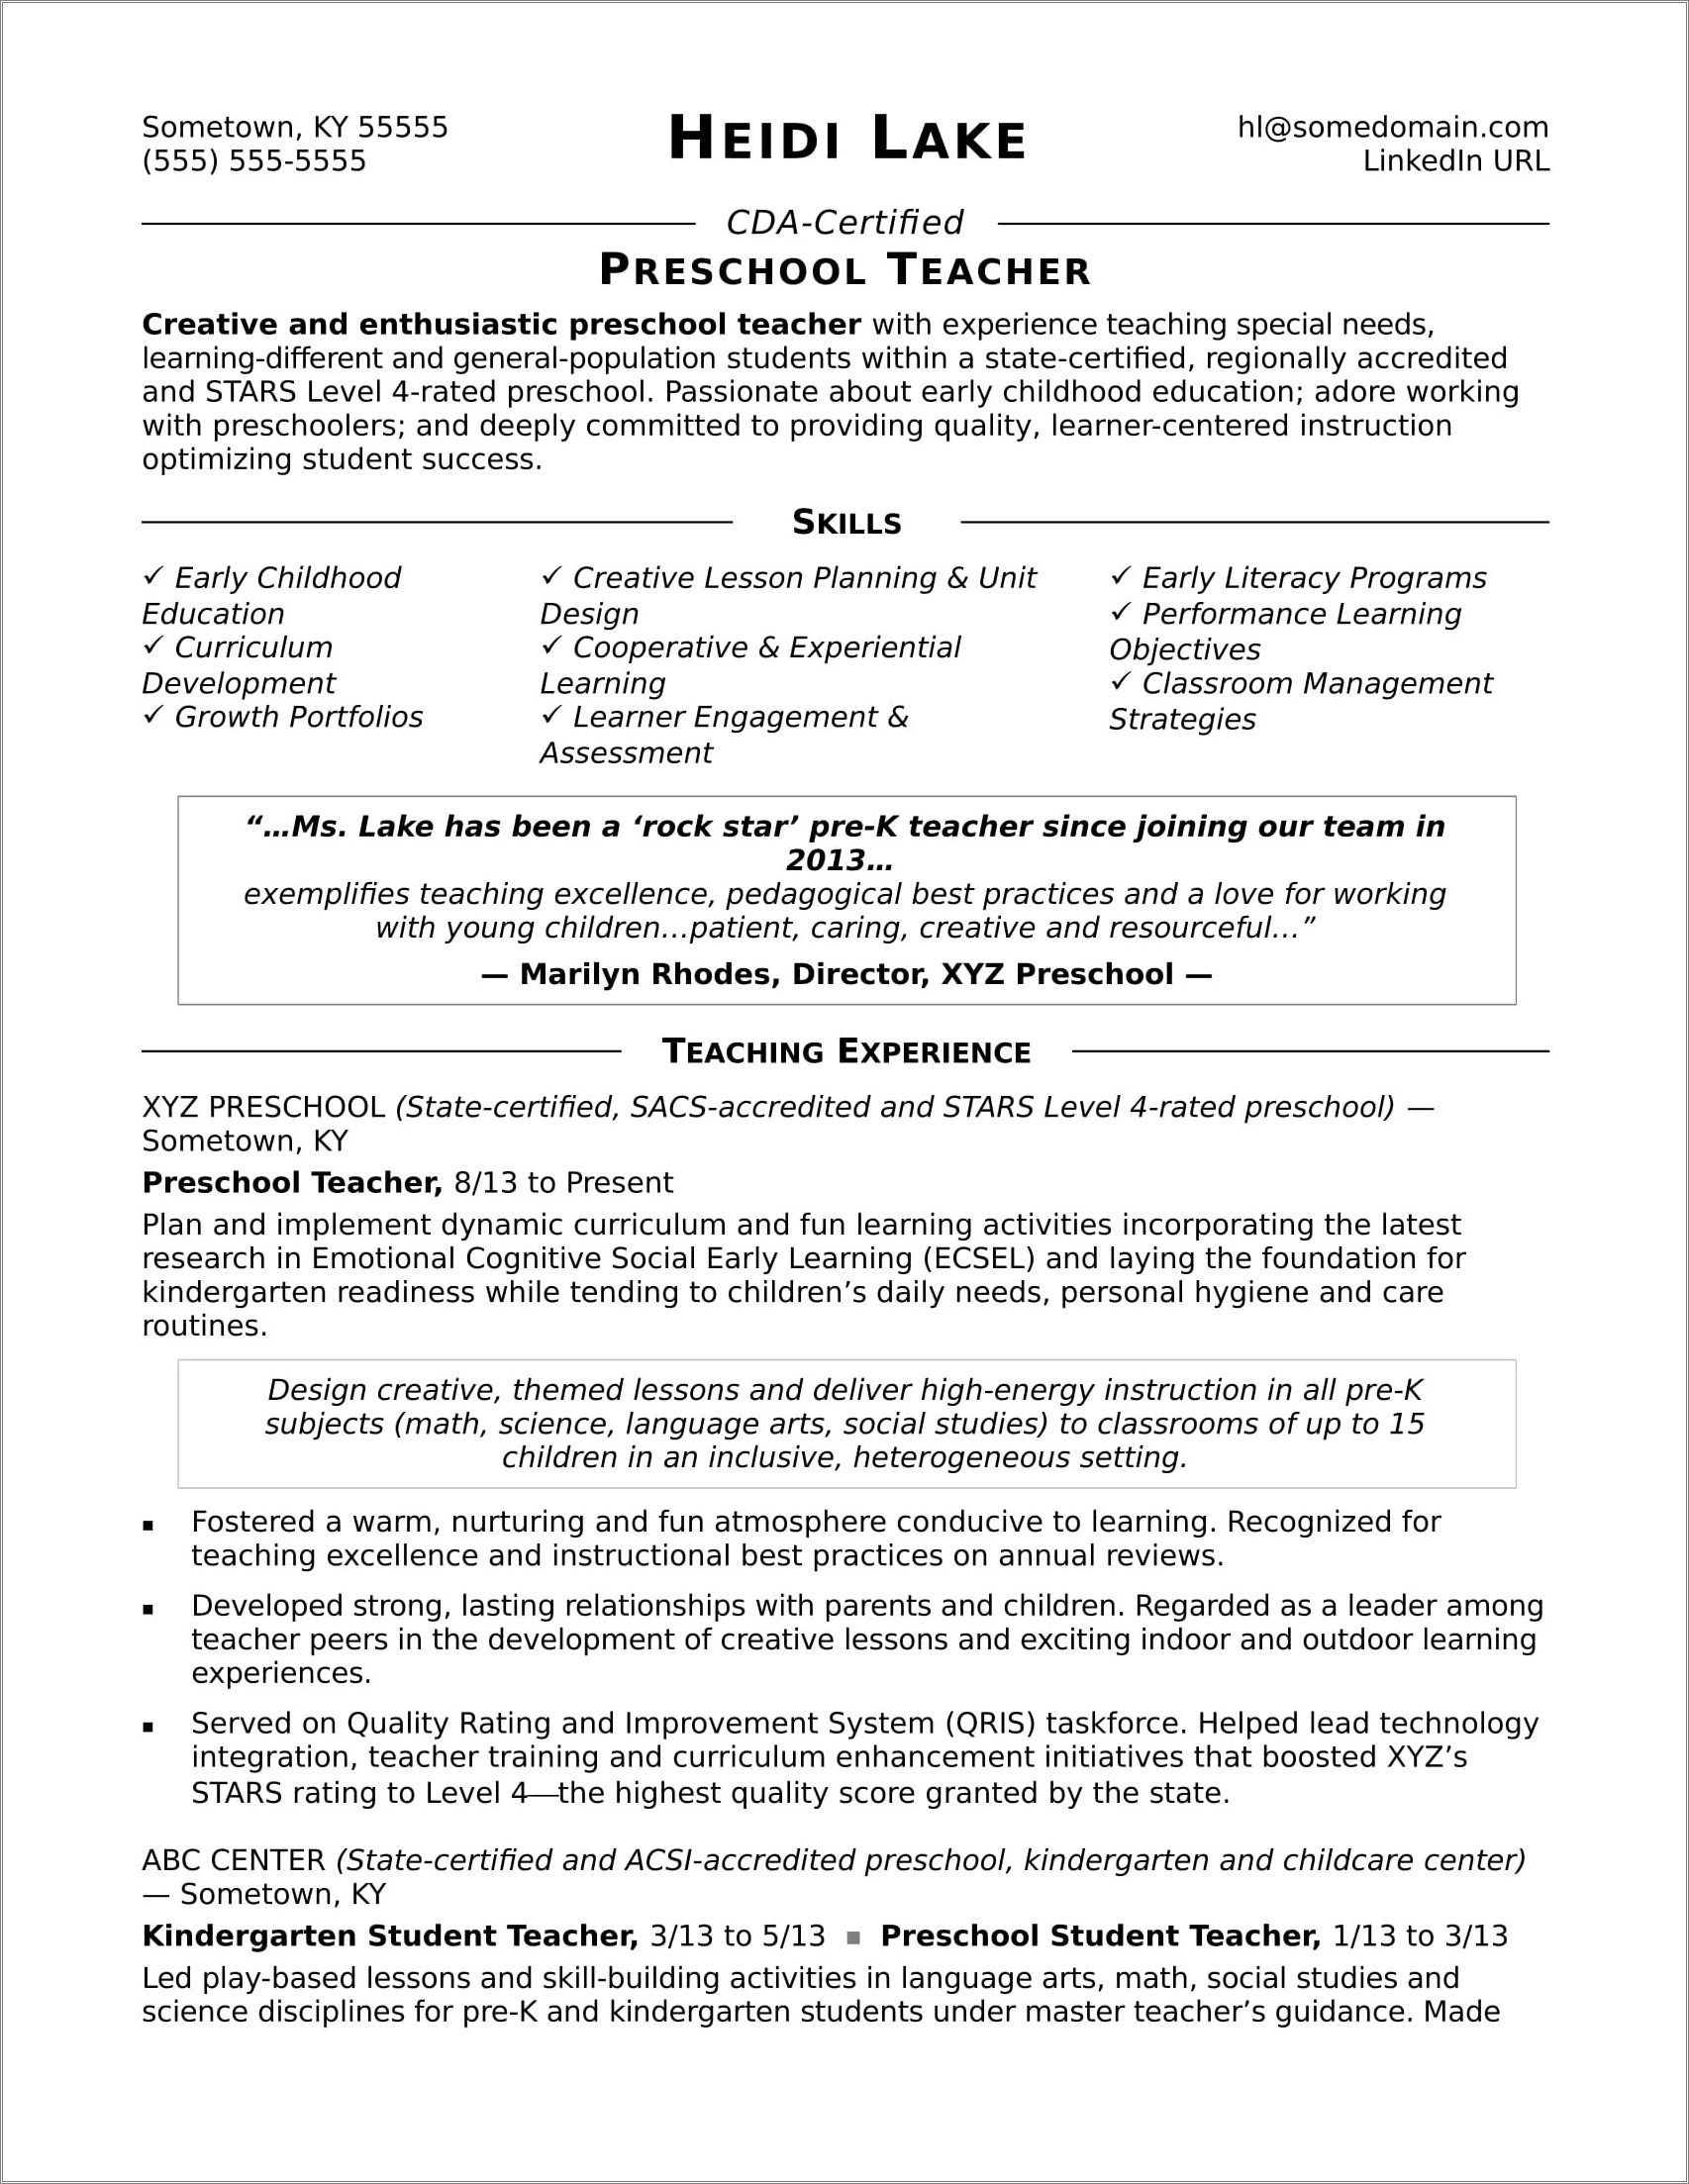 Experience Of A Teacher In Resume